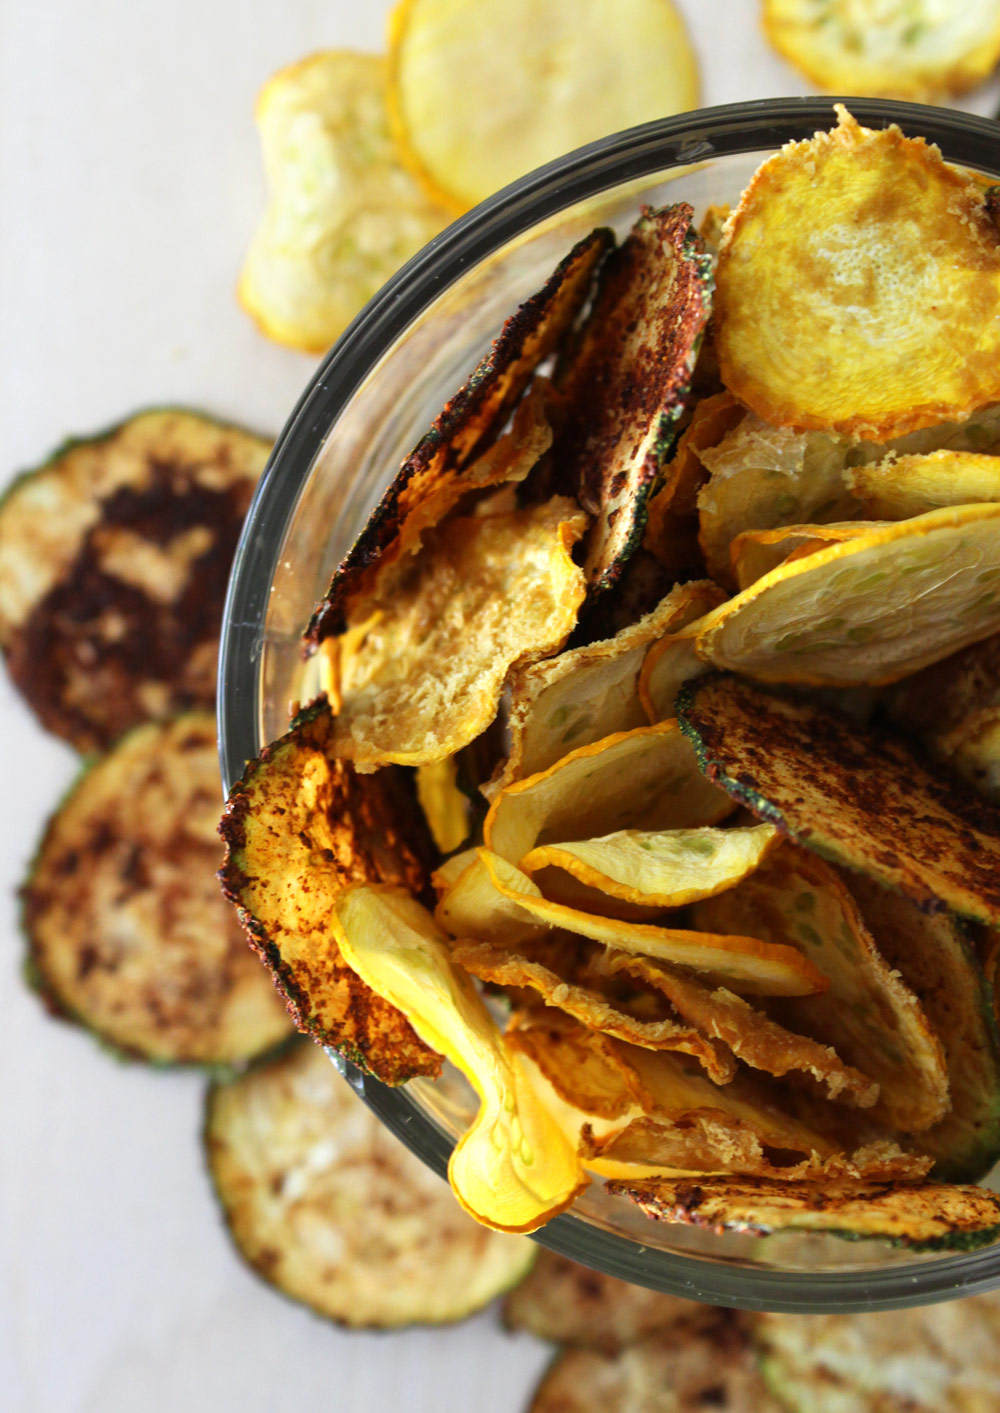 Featured image for “Zucchini Chips”